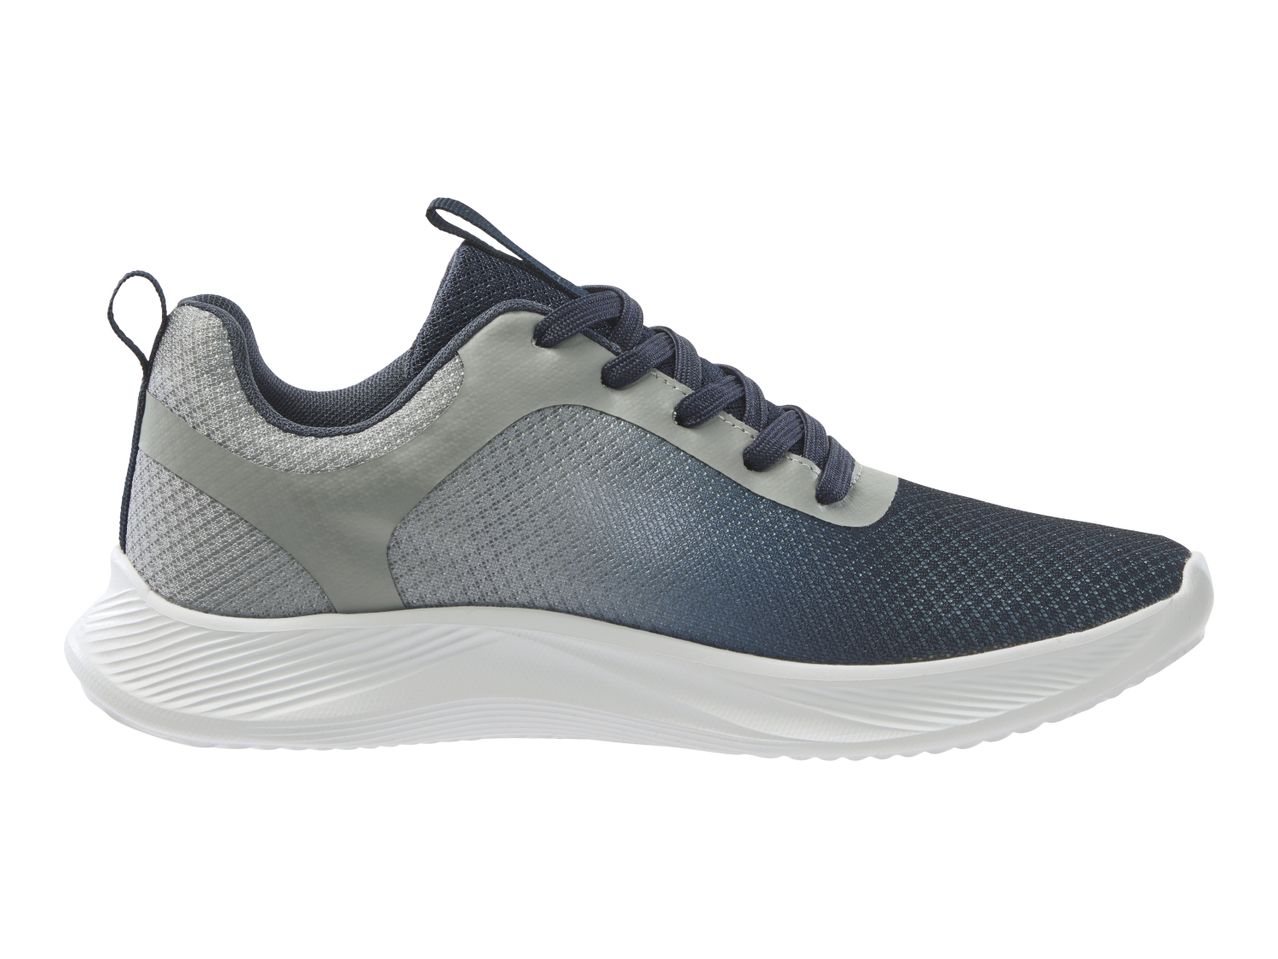 Go to full screen view: Crivit Men’s Trainers - Image 3